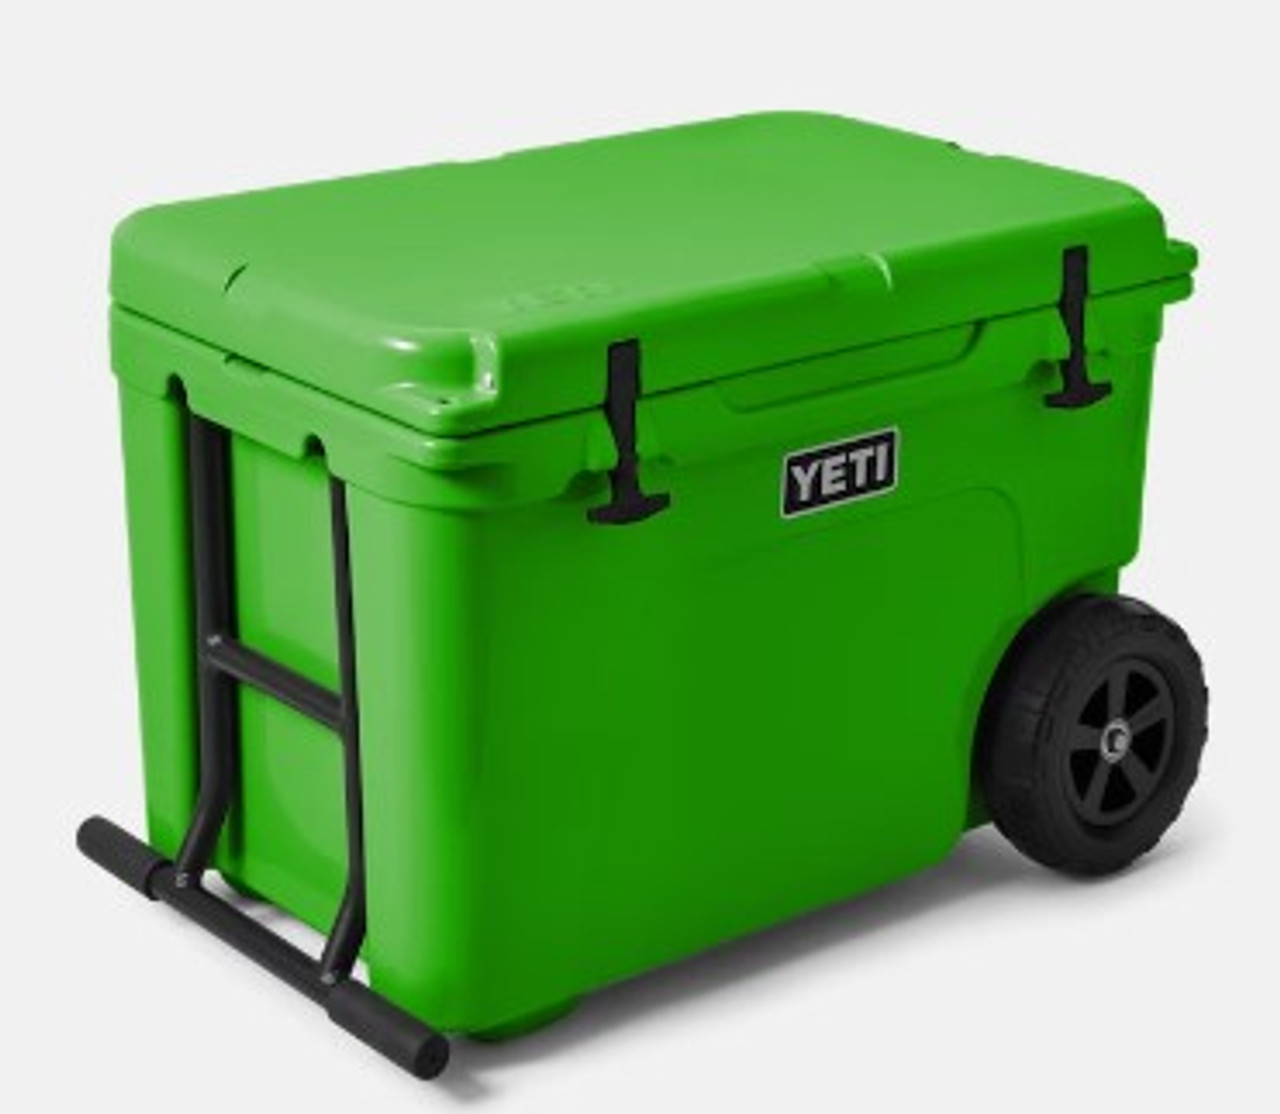 https://cdn11.bigcommerce.com/s-s7ib93jl4n/images/stencil/1280x1280/products/55451/82930/tundra-Haul-Wheeled-Cooler-Canopy-Green-E__56398.1678475920.jpg?c=2?imbypass=on